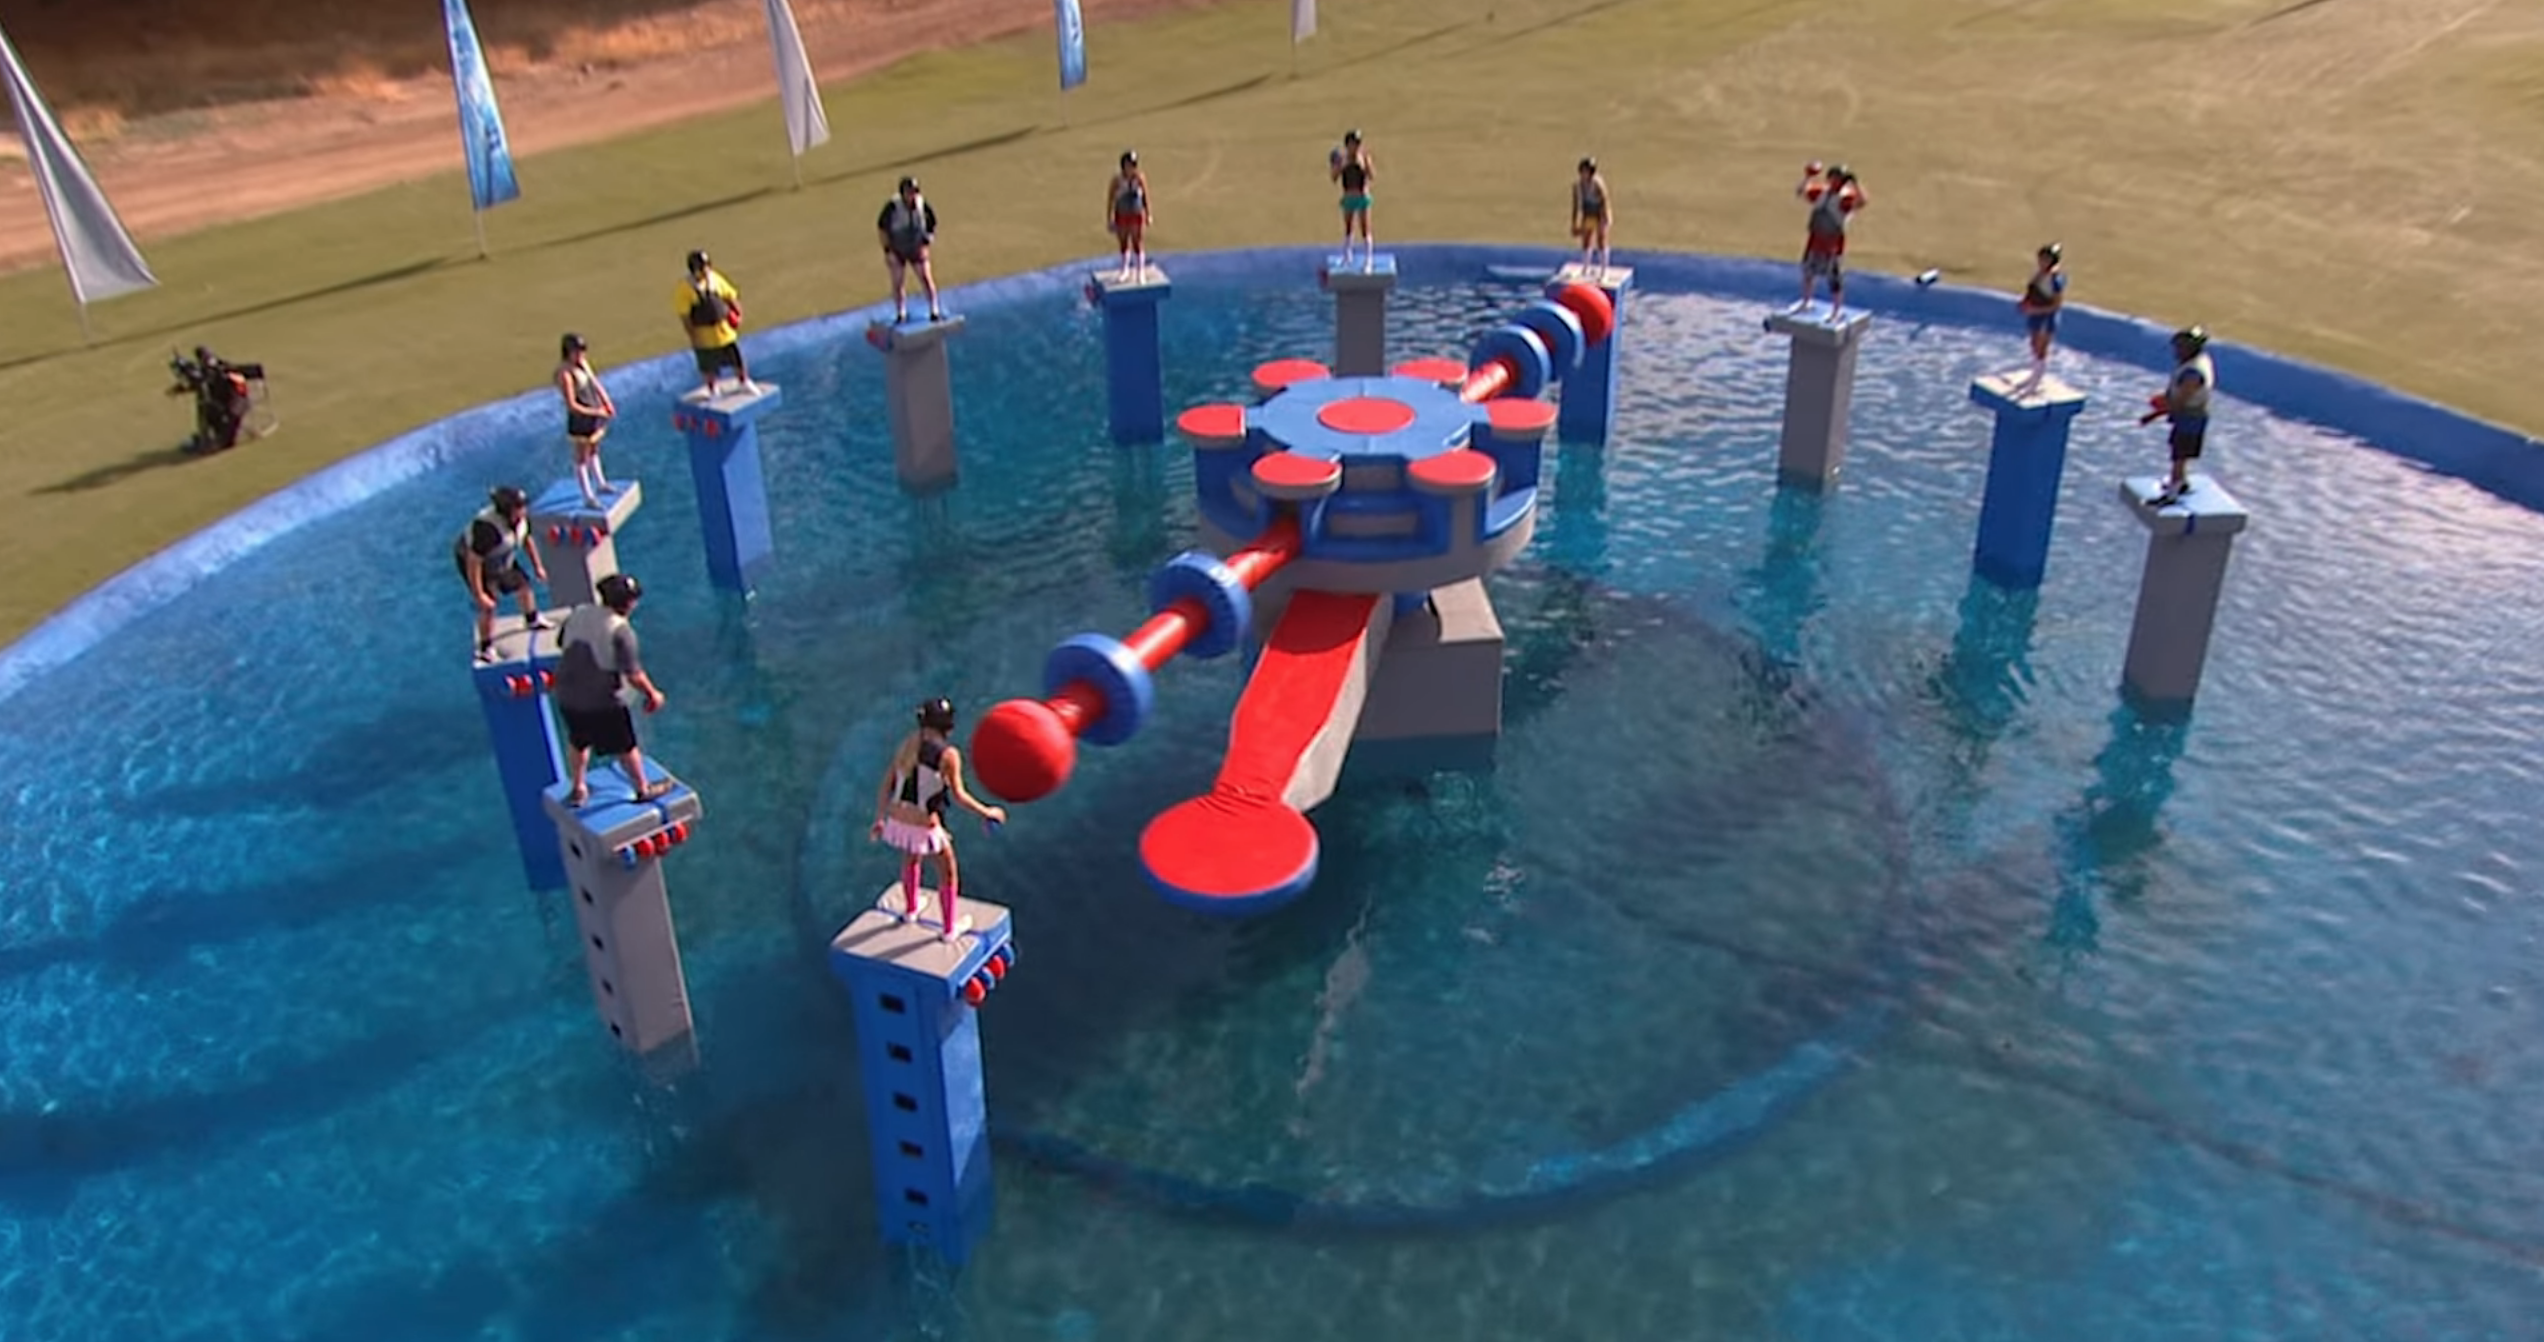 Wipeout' contestant dead after completing obstacle course